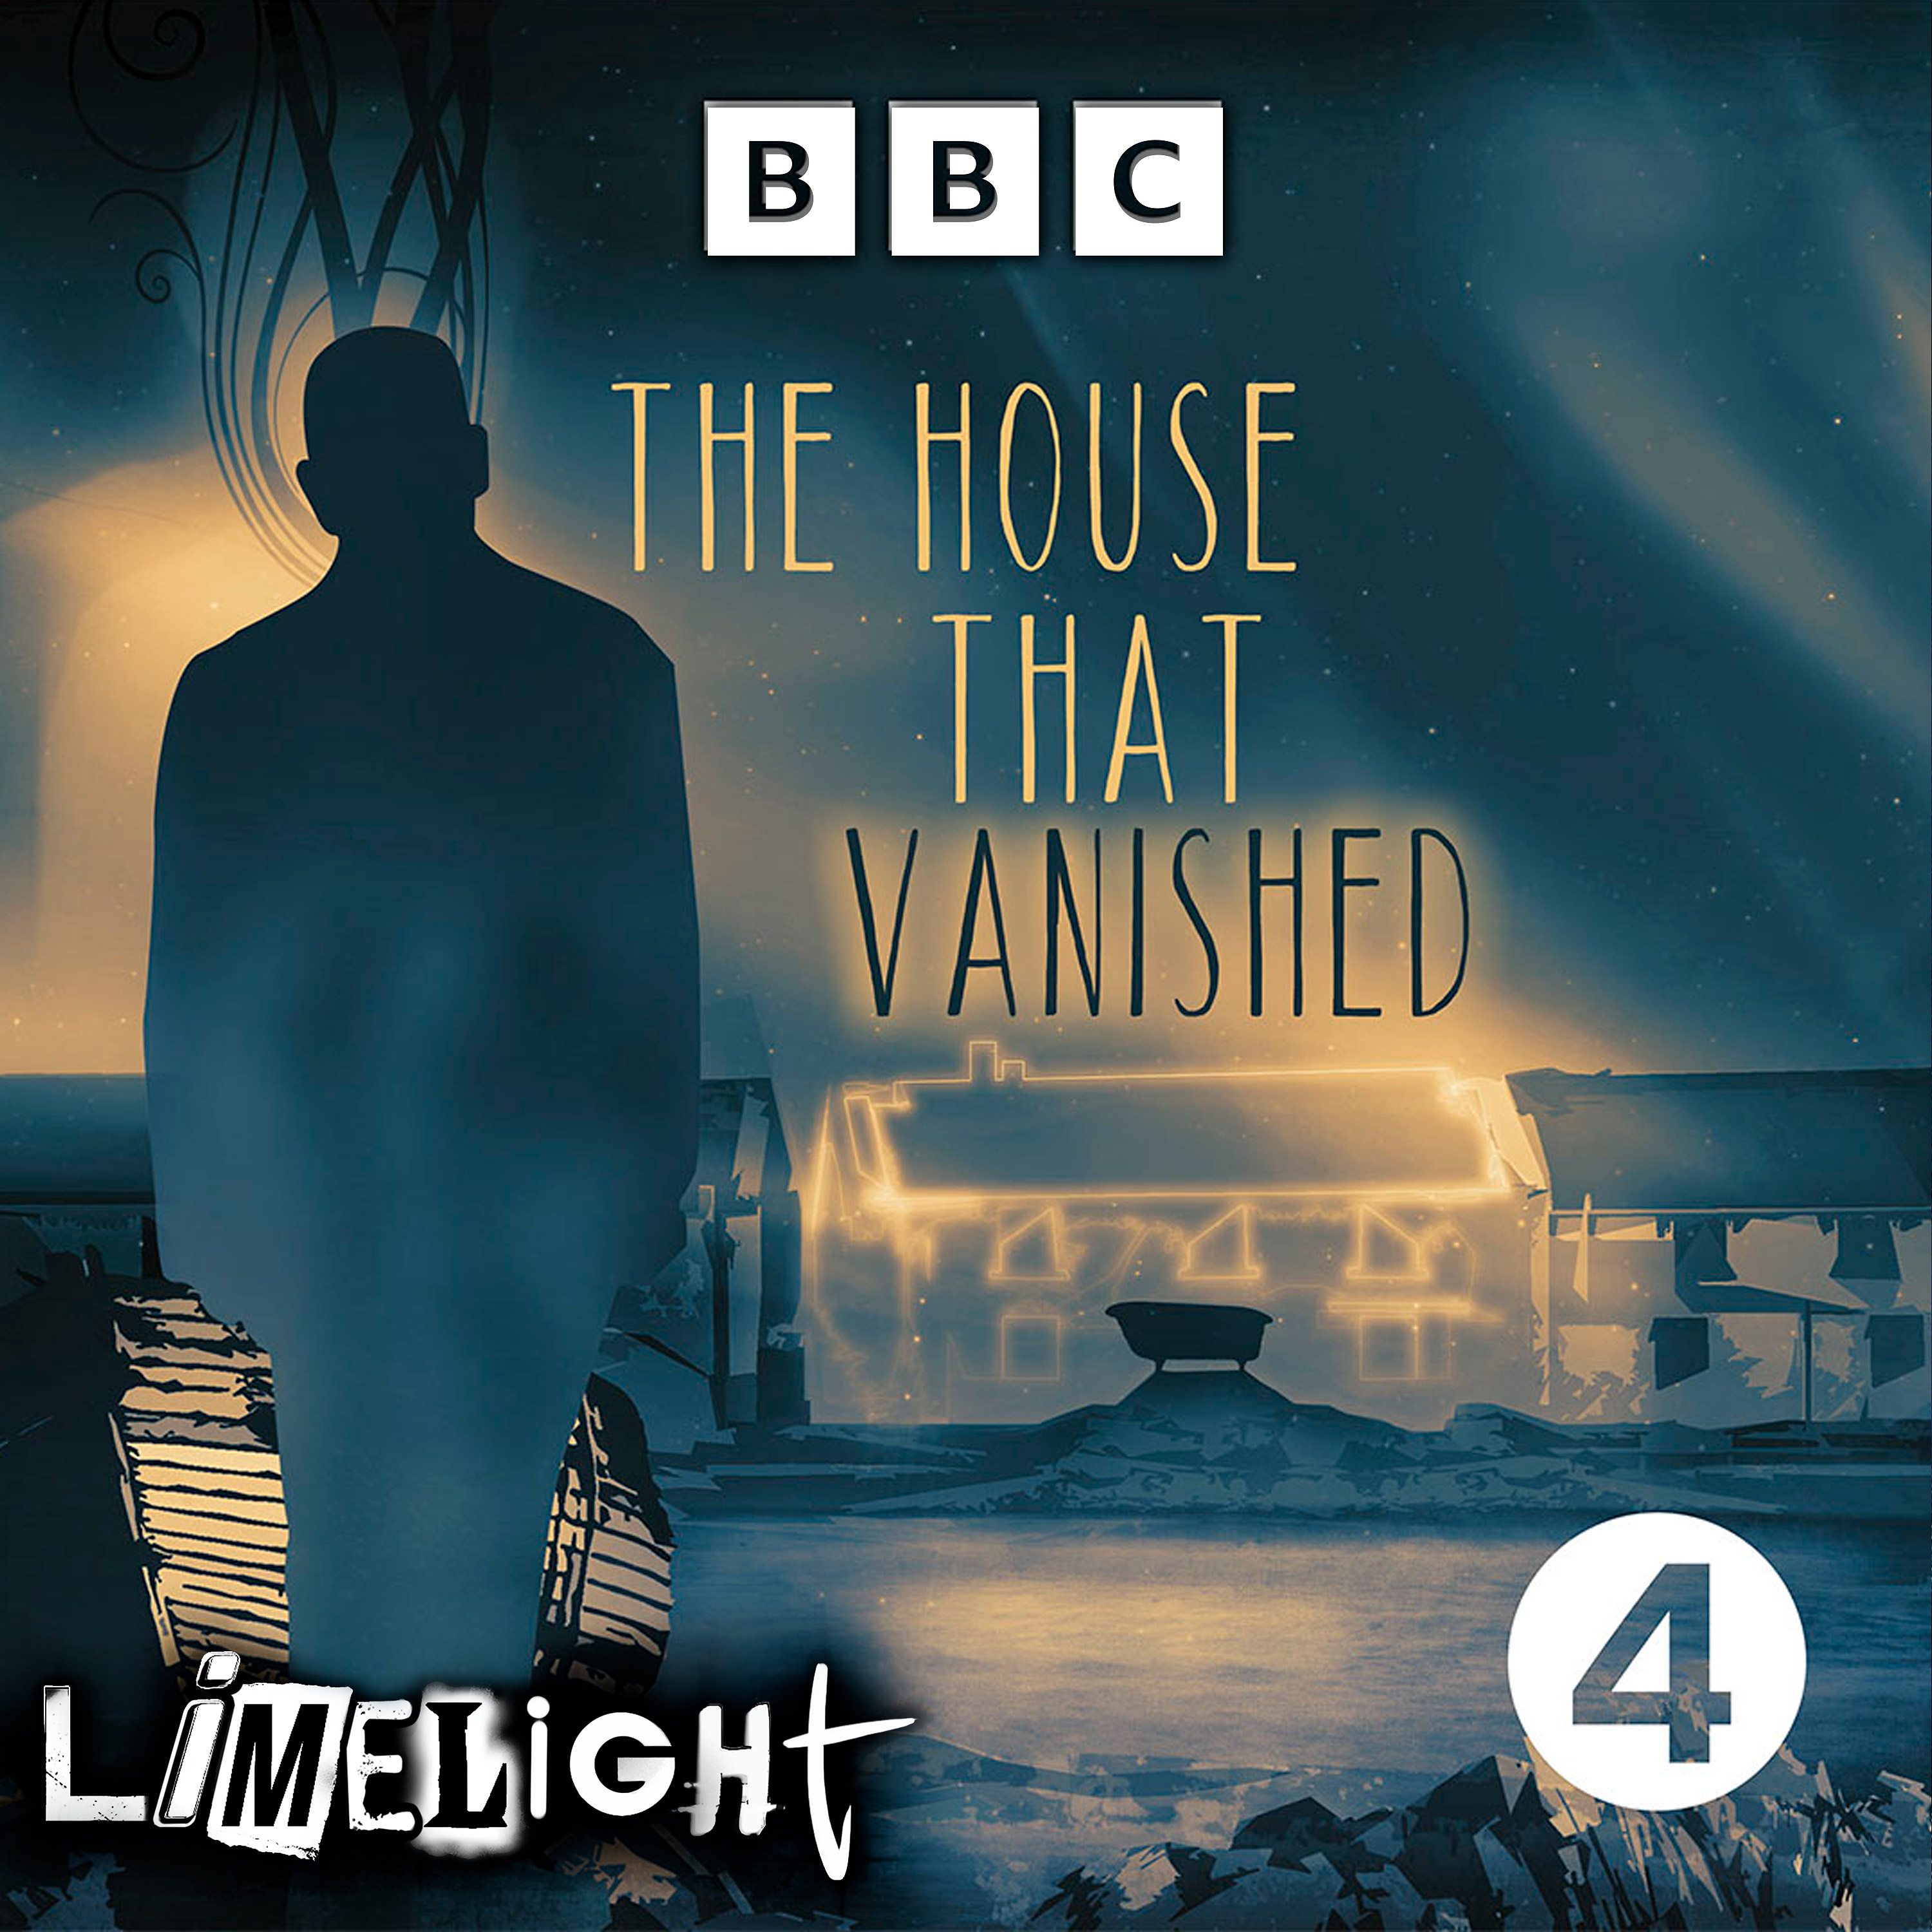 Introducing The House That Vanished